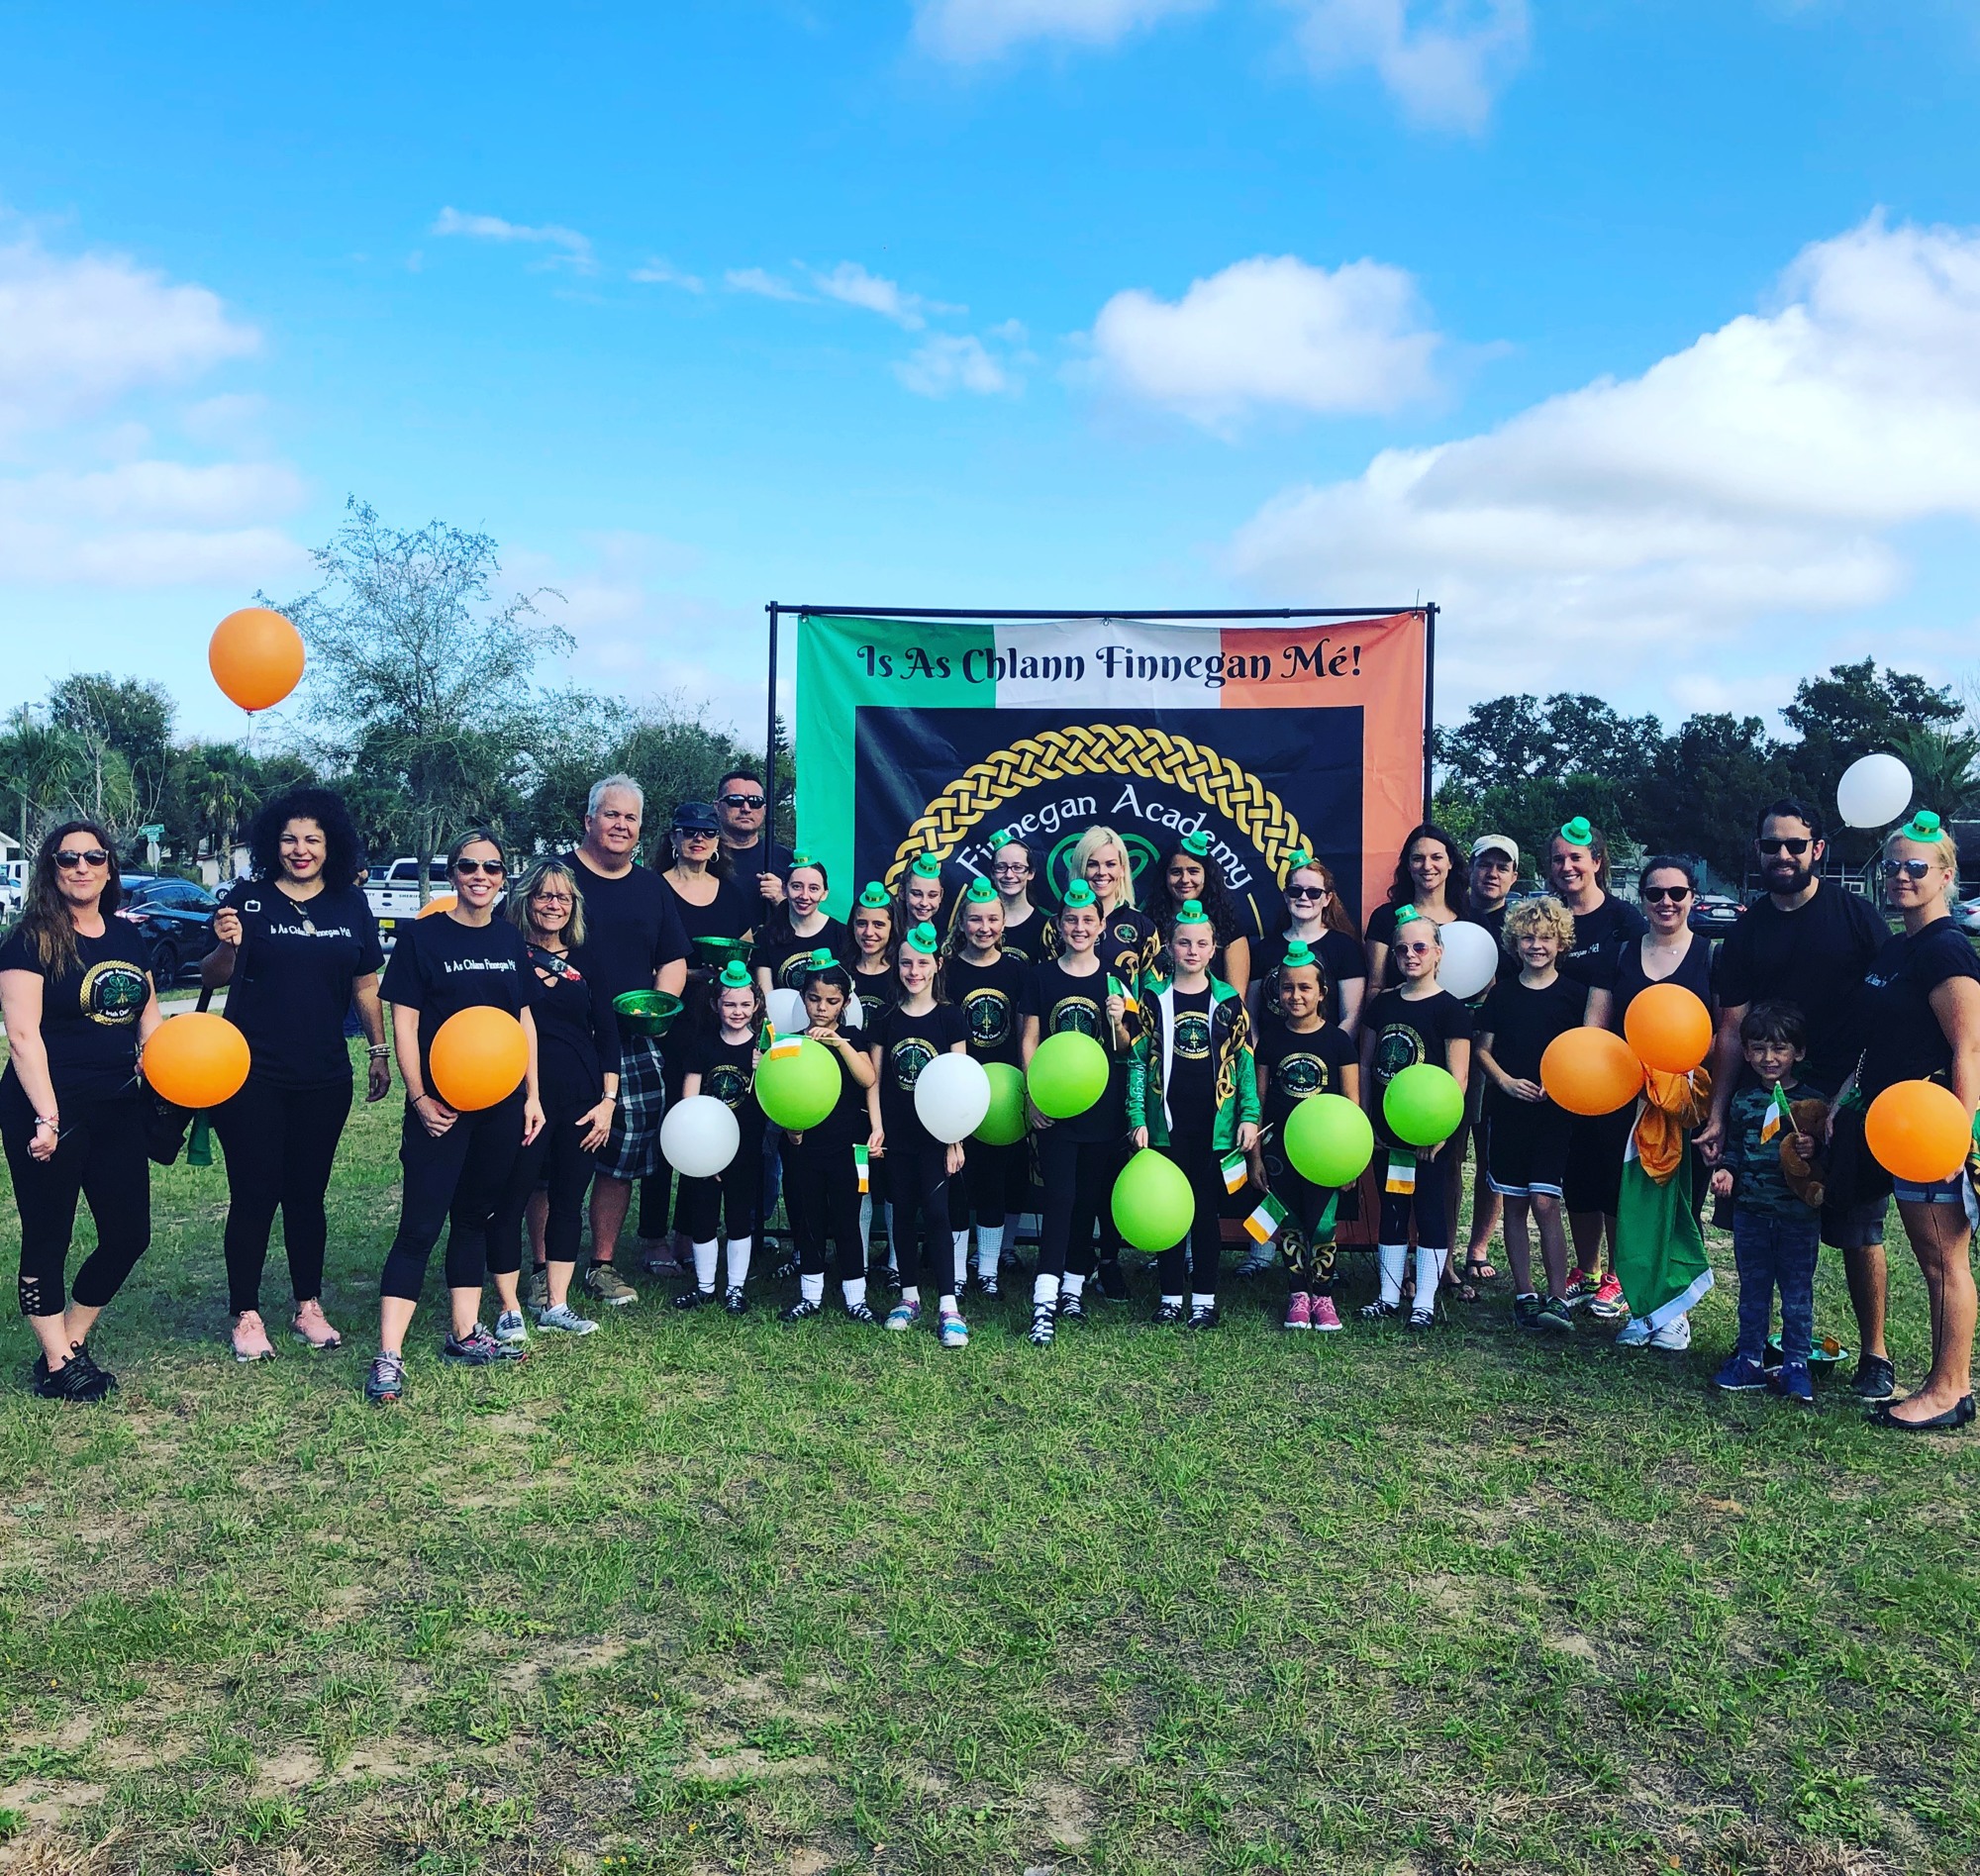 Students of the Finnegan Academy of Irish Dance will be performing at the upcoming fourth annual Crooked Can Celtic Festival on March 15 at Crooked Can Brewing Company, 426 W. Plant St., in downtown Winter Garden.